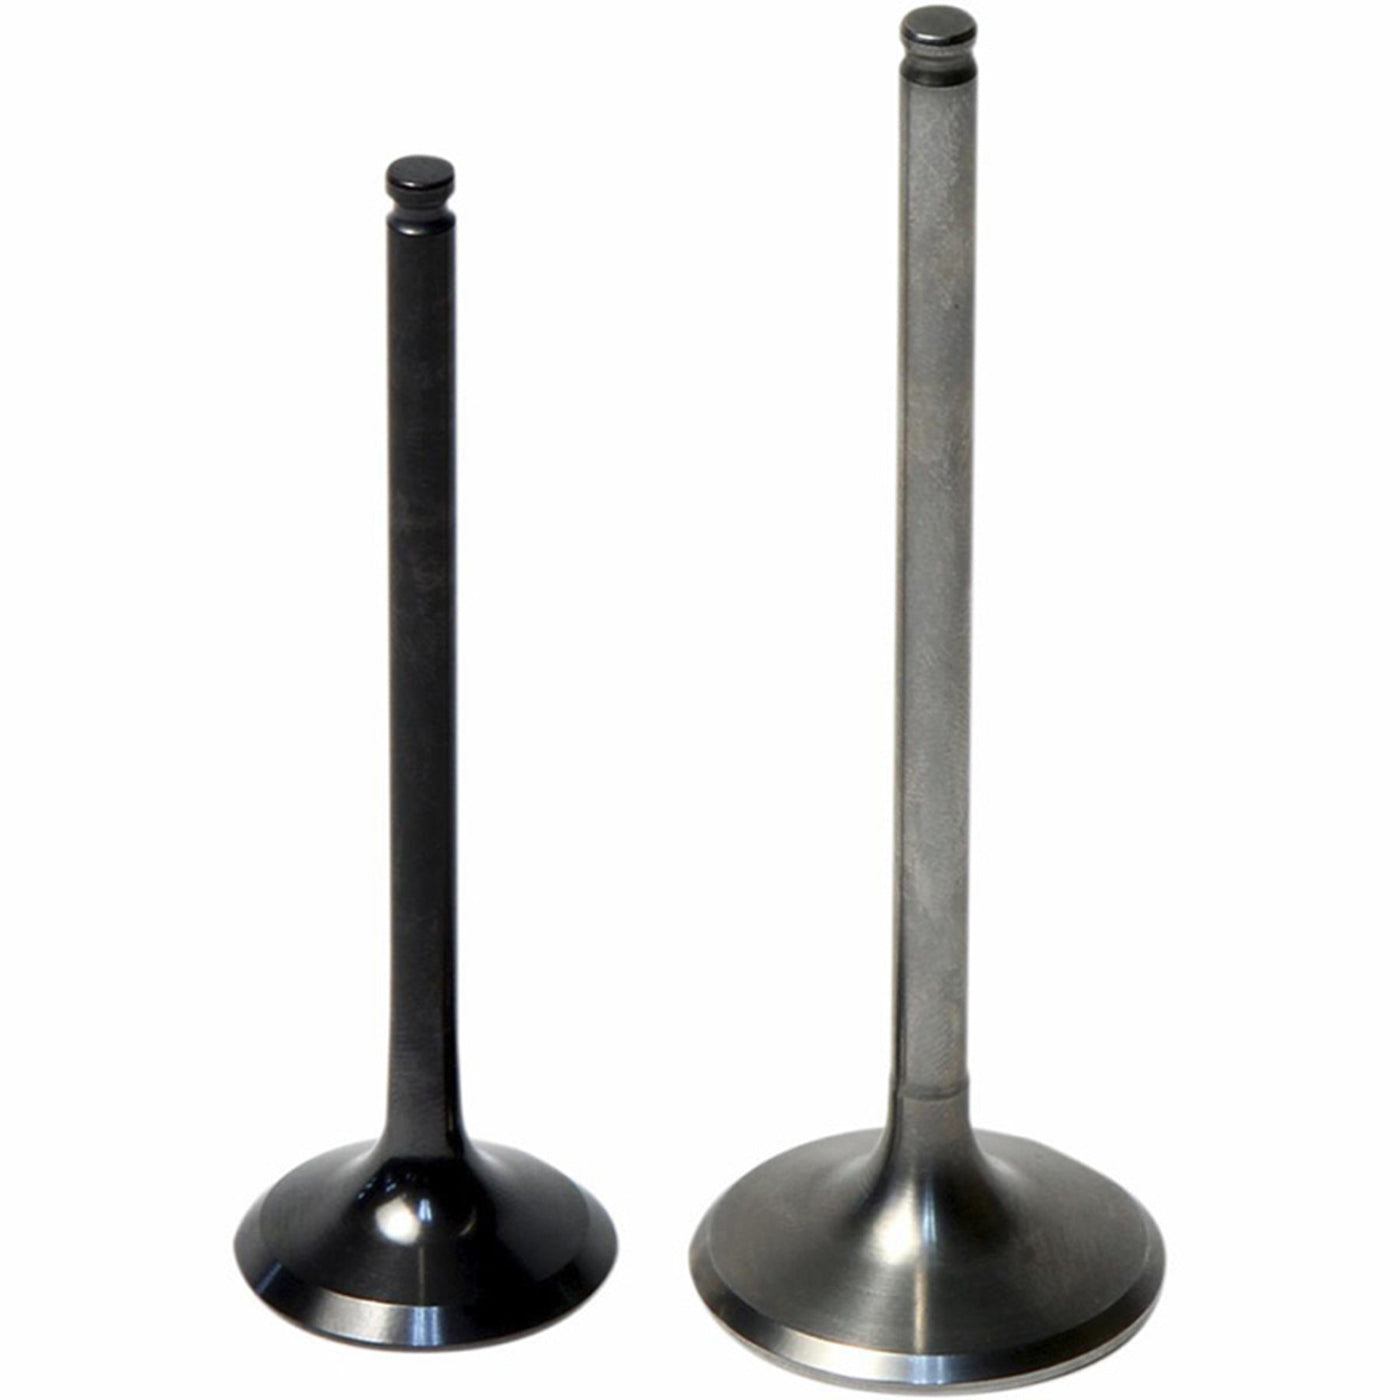 Hotcams 8400031-1 Intake and Exhaust Valves #8400031-1